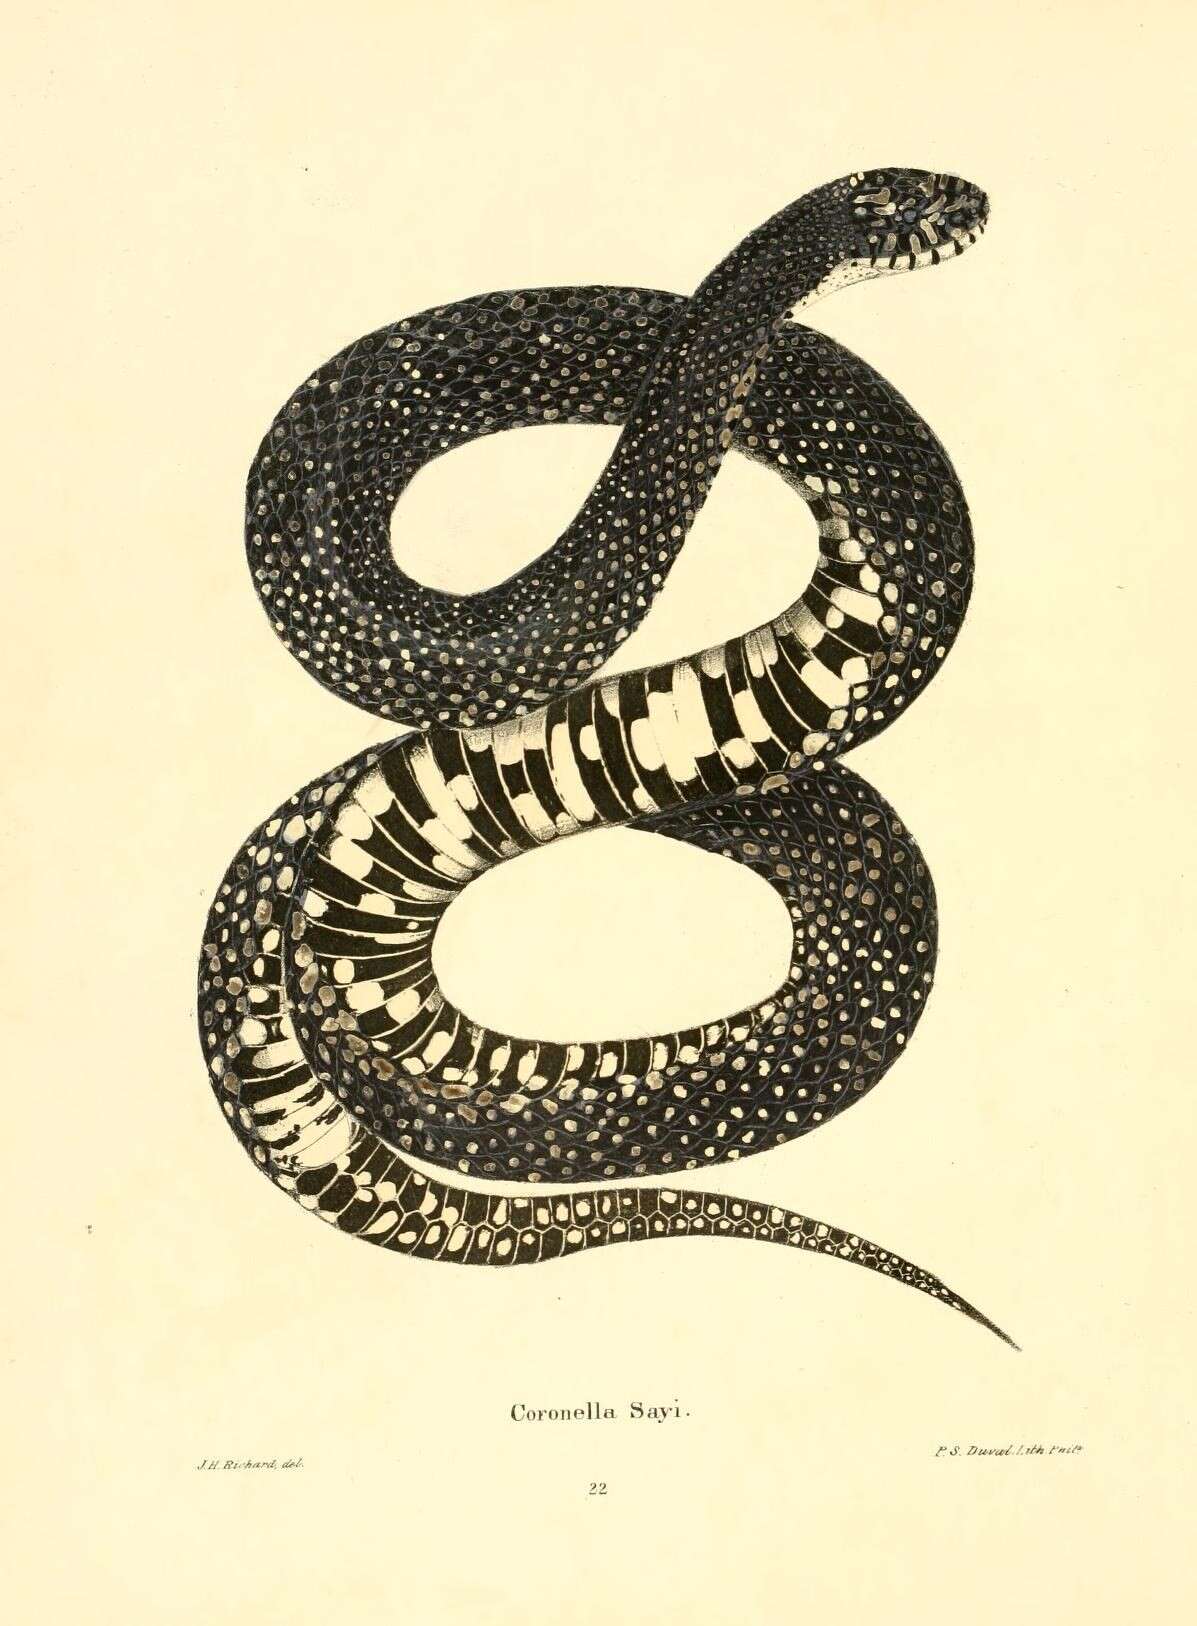 Image of Pituophis catenifer sayi (Schlegel 1837)